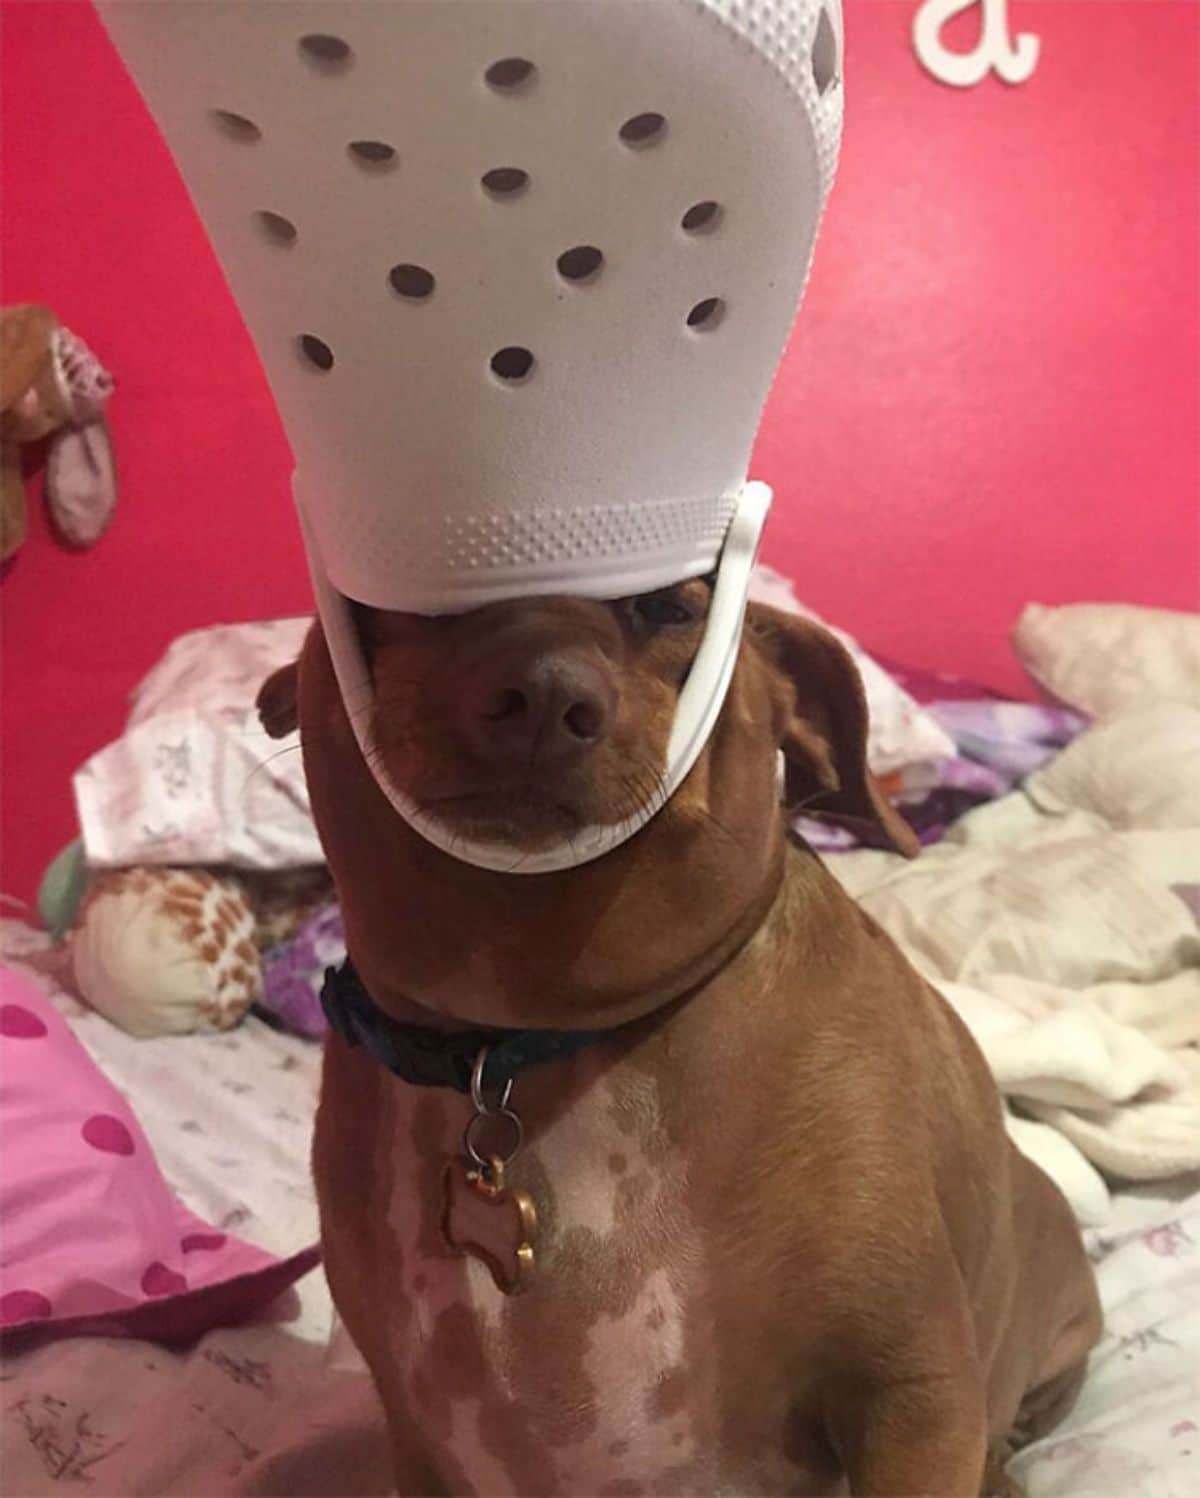 brown dog on bed wearing white crocs slipper on the head